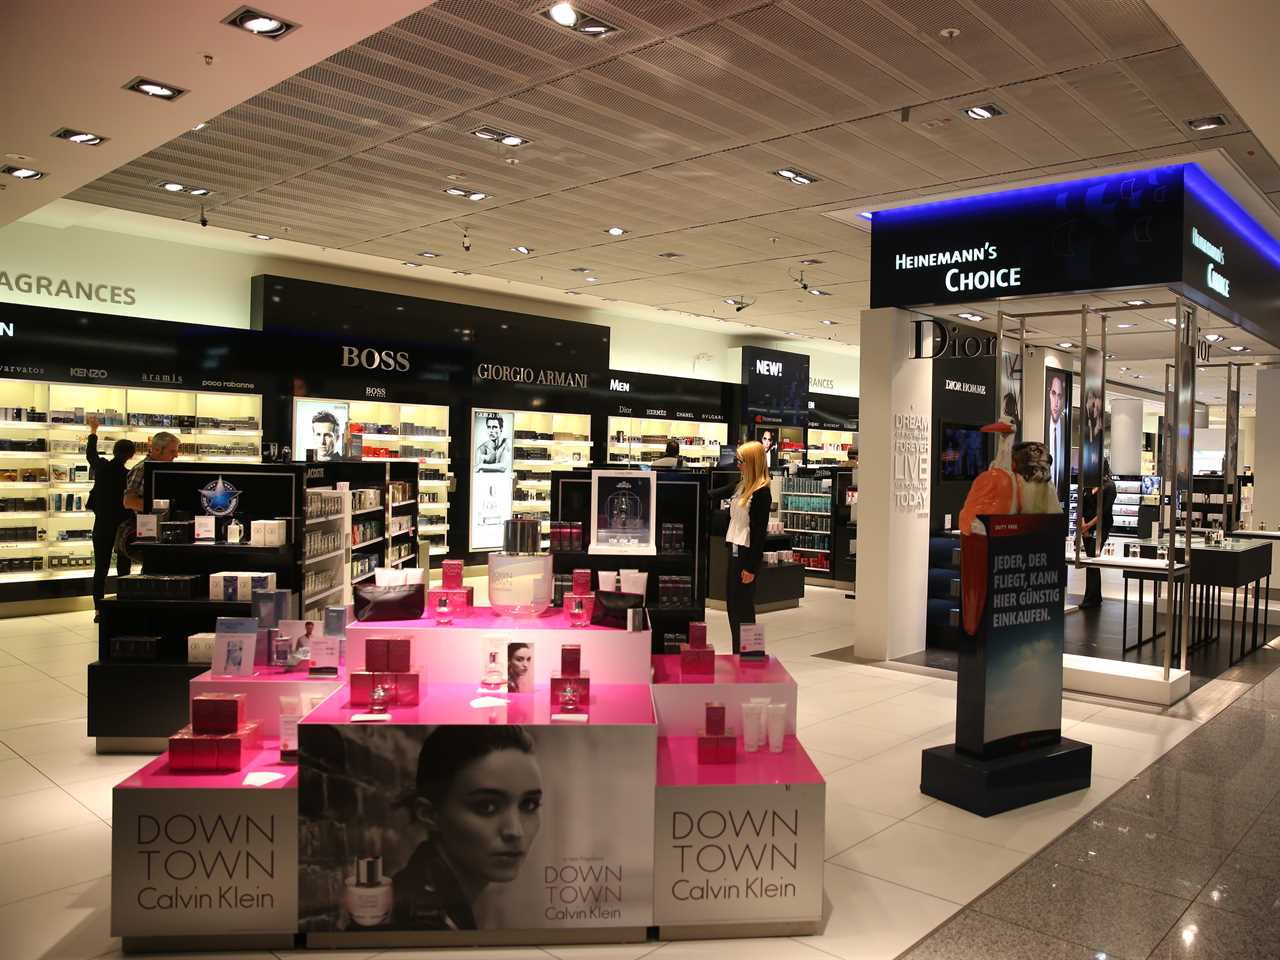 duty free shop airport